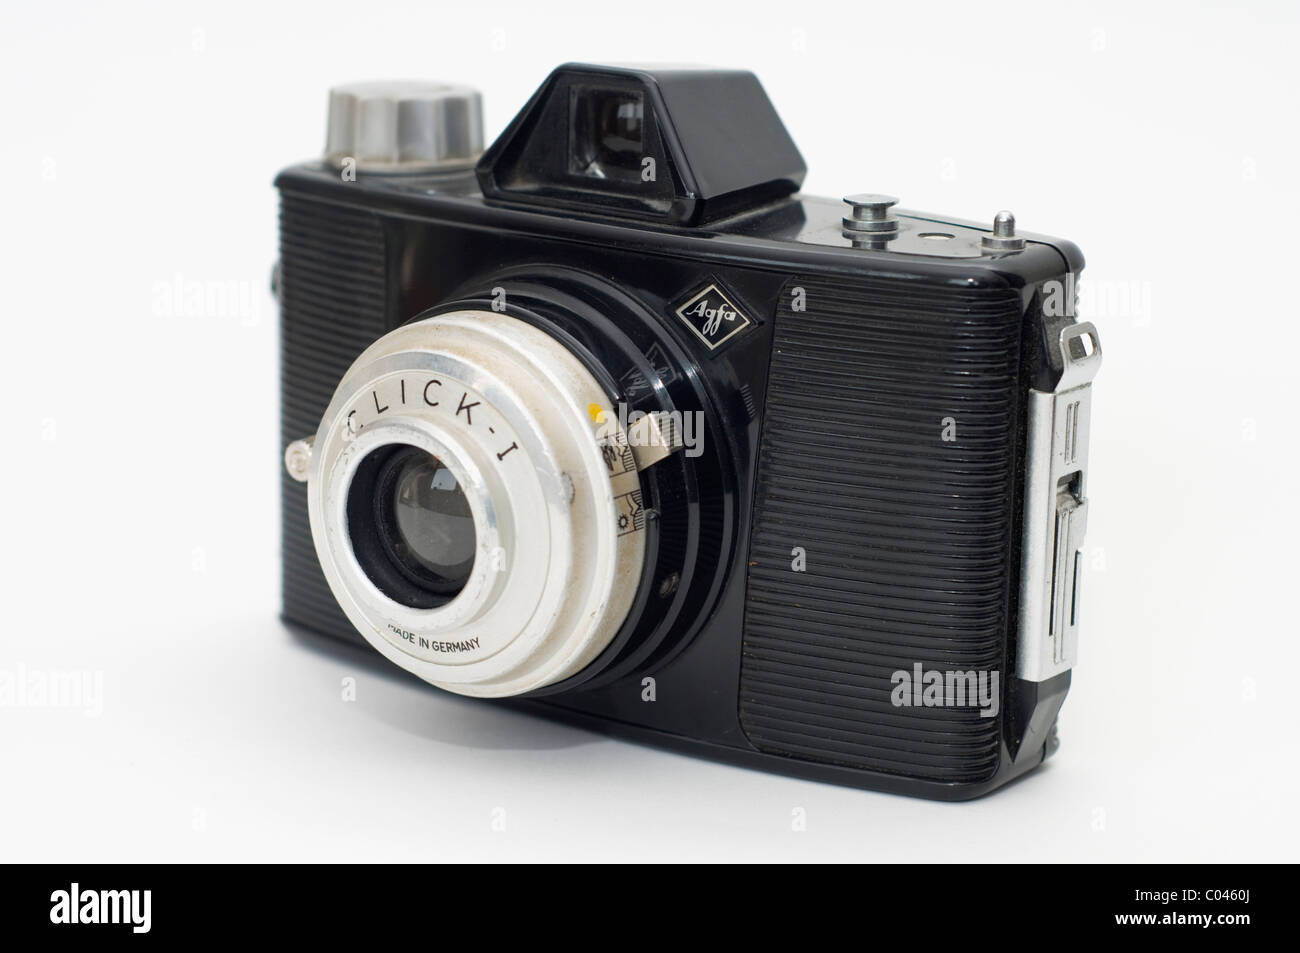 Page 3 - Agfa Film High Resolution Stock Photography and Images - Alamy